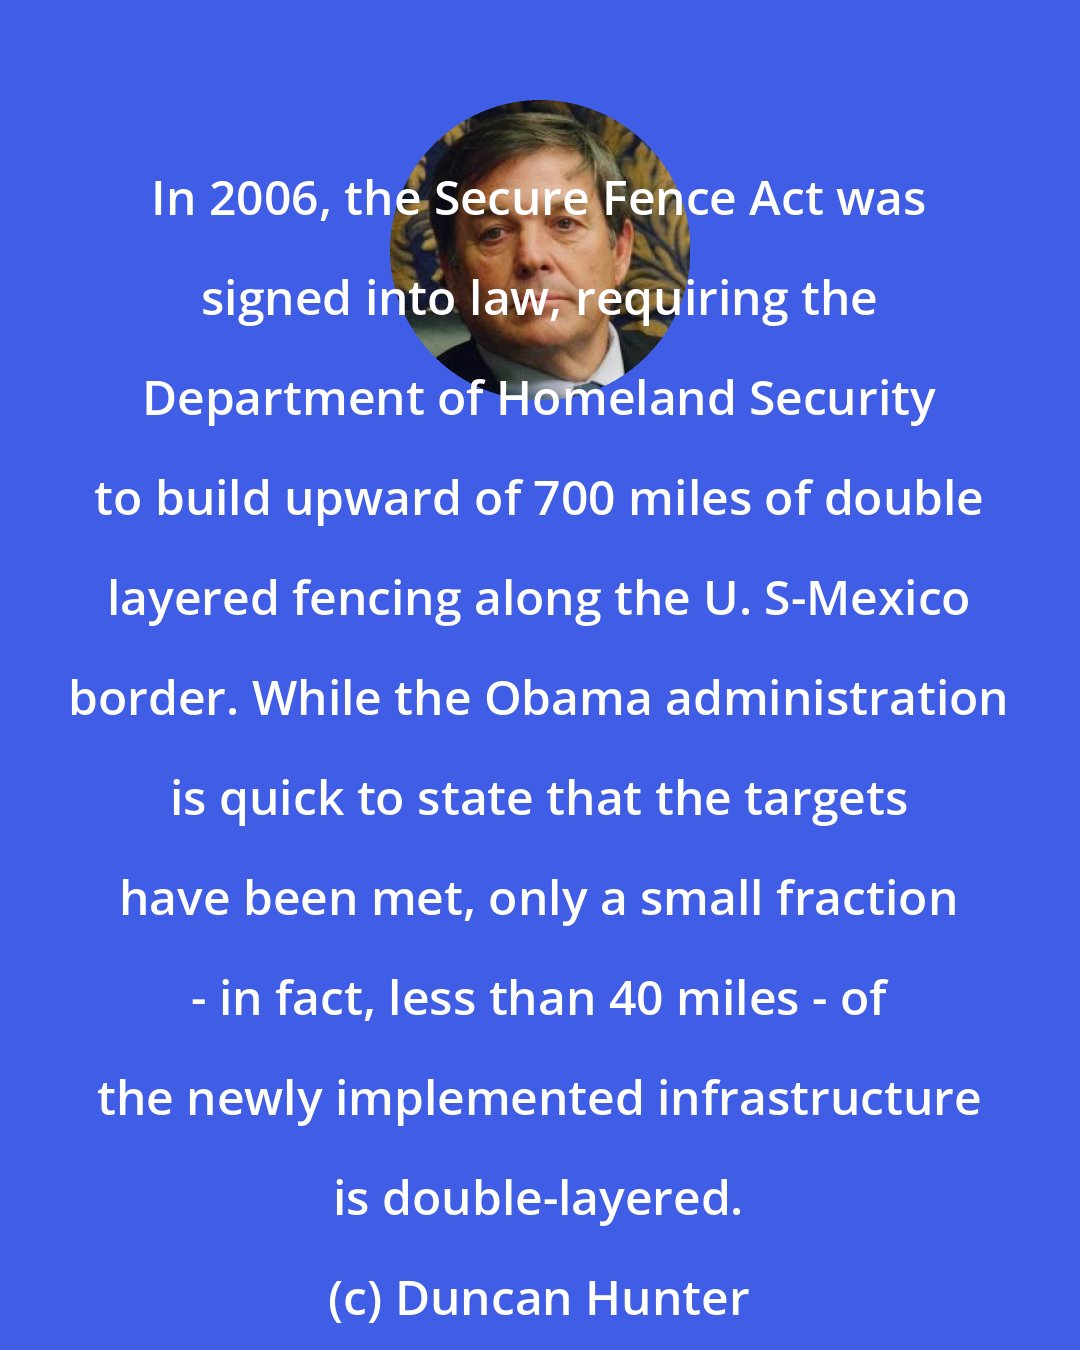 Duncan Hunter: In 2006, the Secure Fence Act was signed into law, requiring the Department of Homeland Security to build upward of 700 miles of double layered fencing along the U. S-Mexico border. While the Obama administration is quick to state that the targets have been met, only a small fraction - in fact, less than 40 miles - of the newly implemented infrastructure is double-layered.